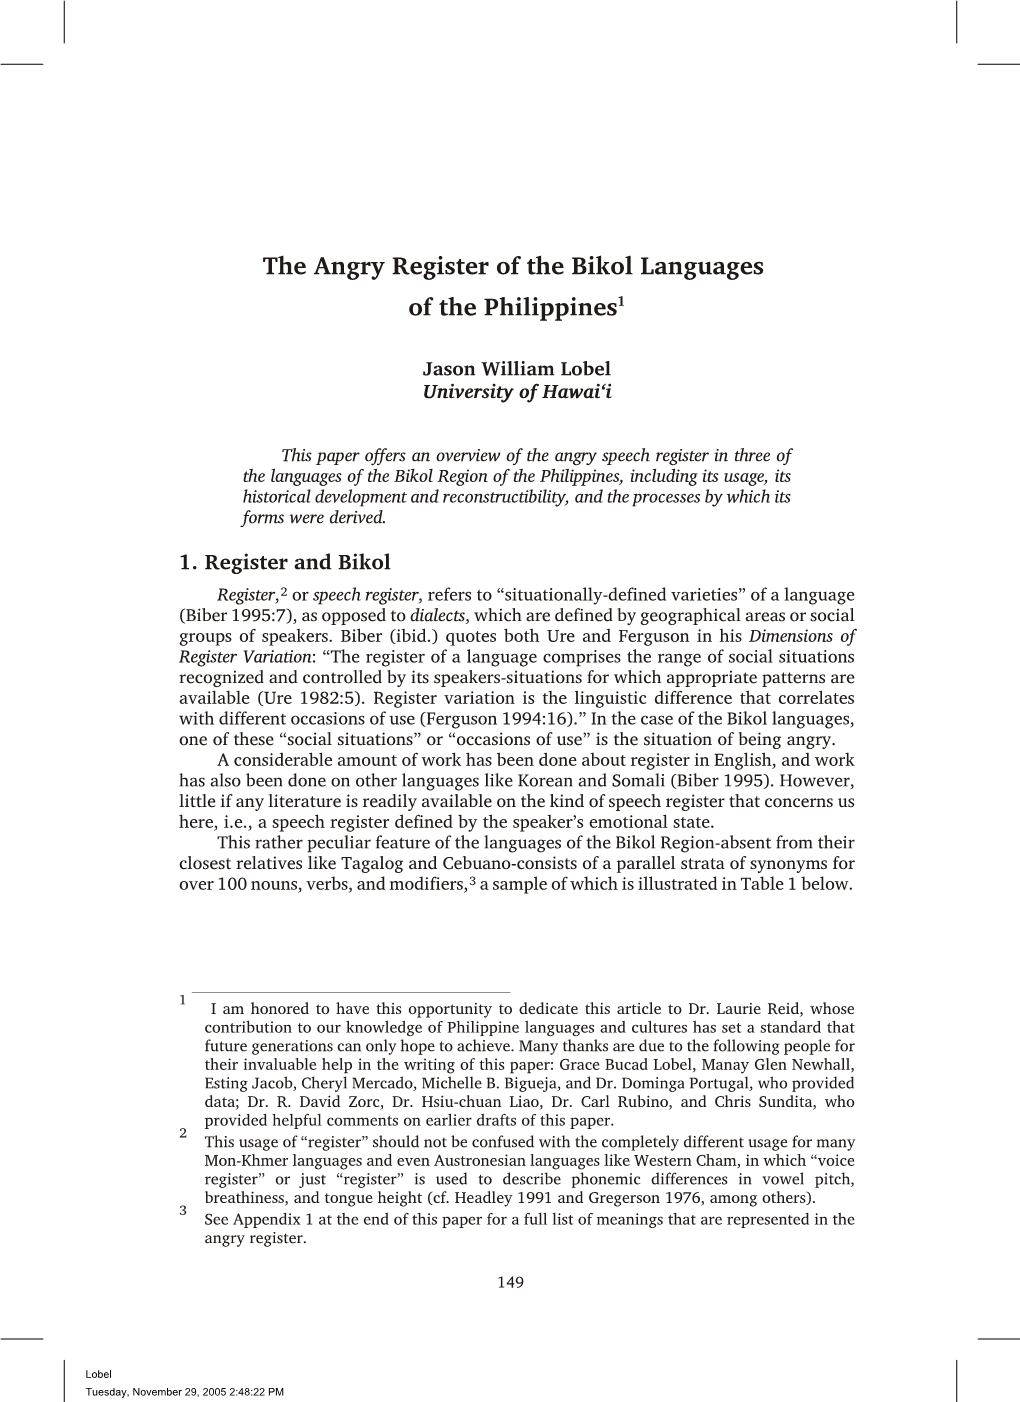 The Angry Register of the Bikol Languages of the Philippines1